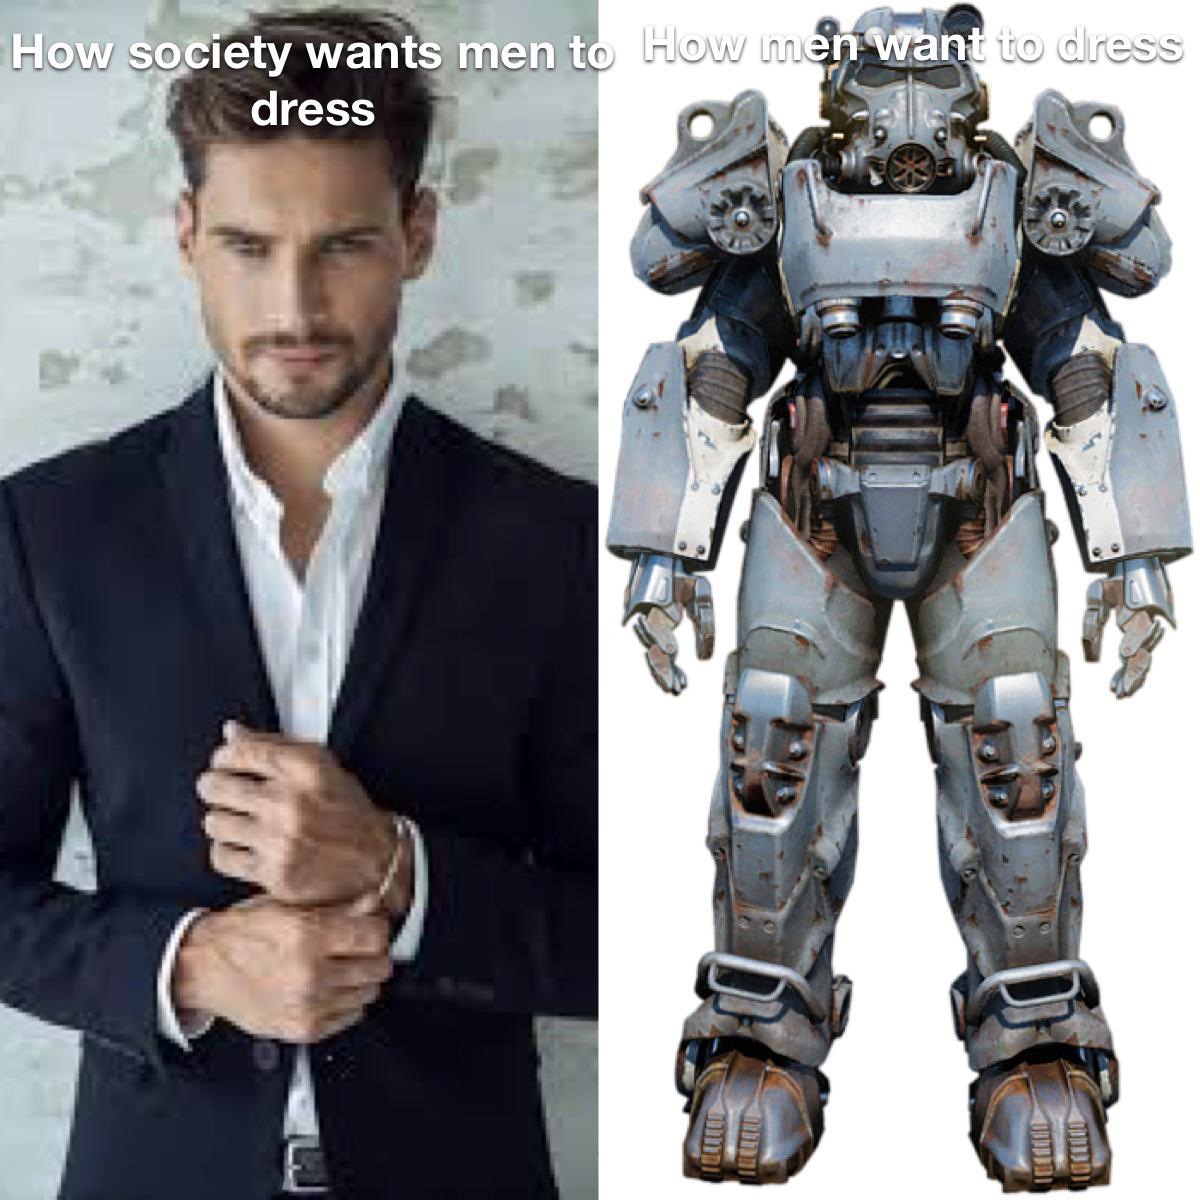 dank memes - confident poses for men - How society wants men to How men want to dress dress